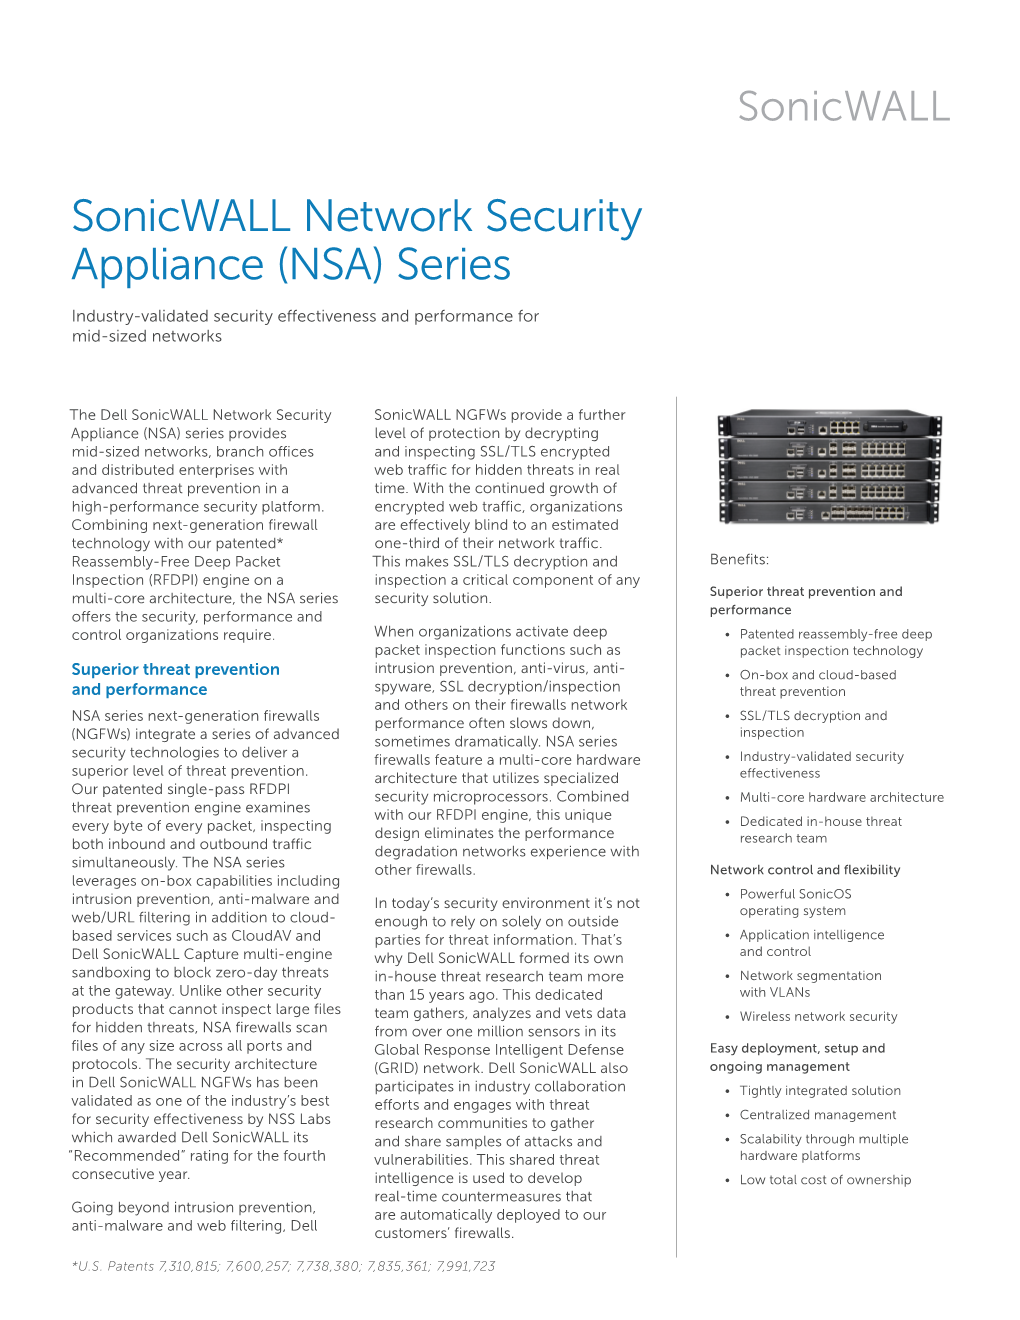 Sonicwall Network Security Appliance (NSA) Series